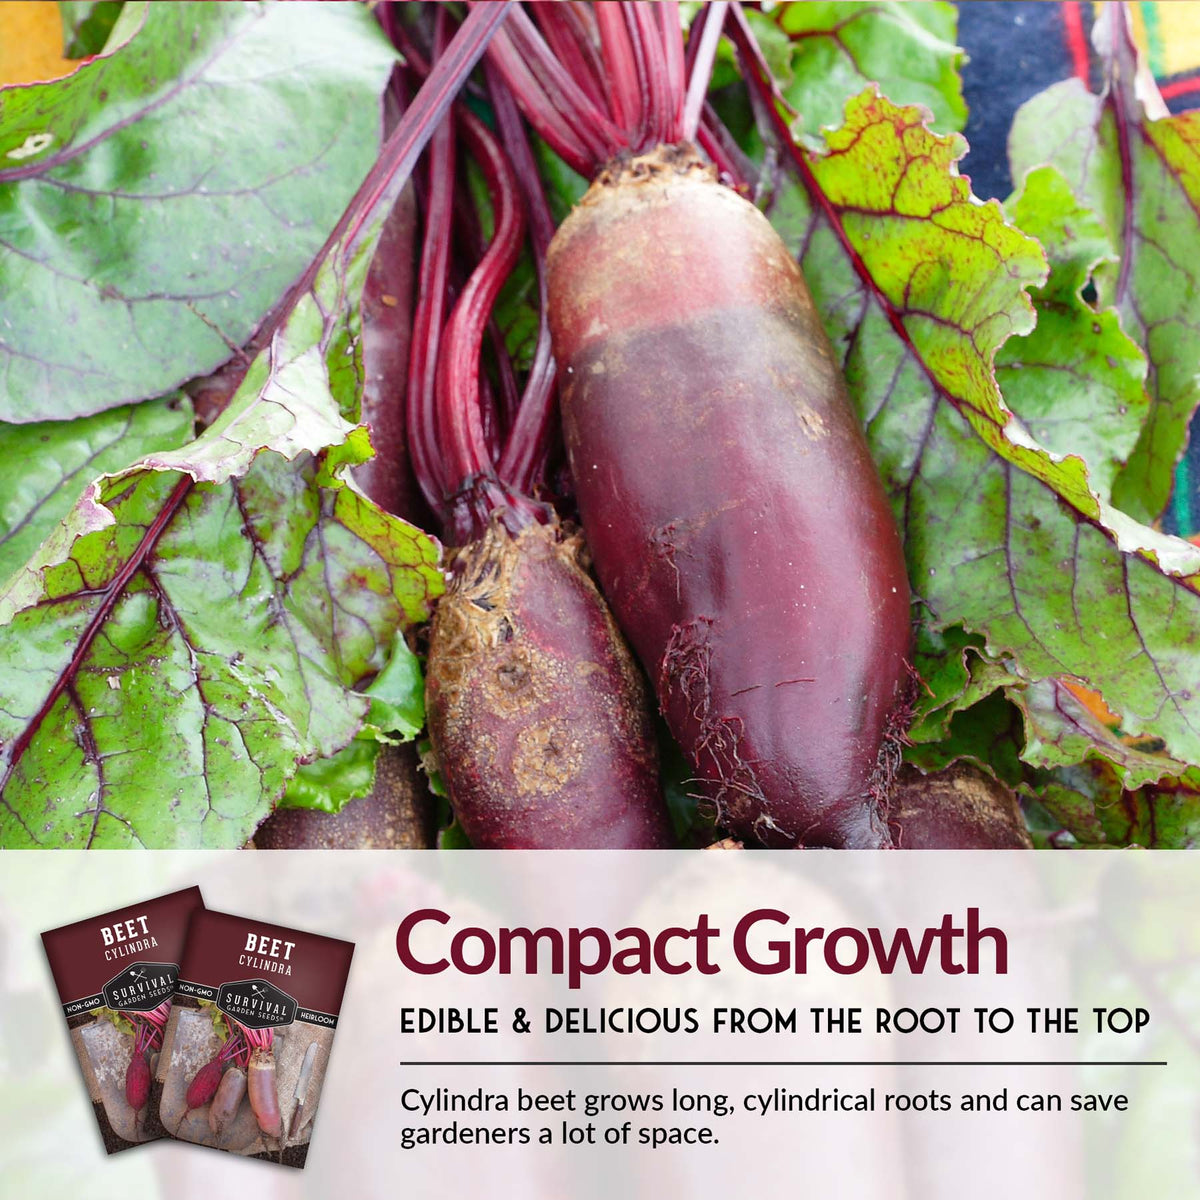 Cylindra Beets are edible  and delicious from the root to the top